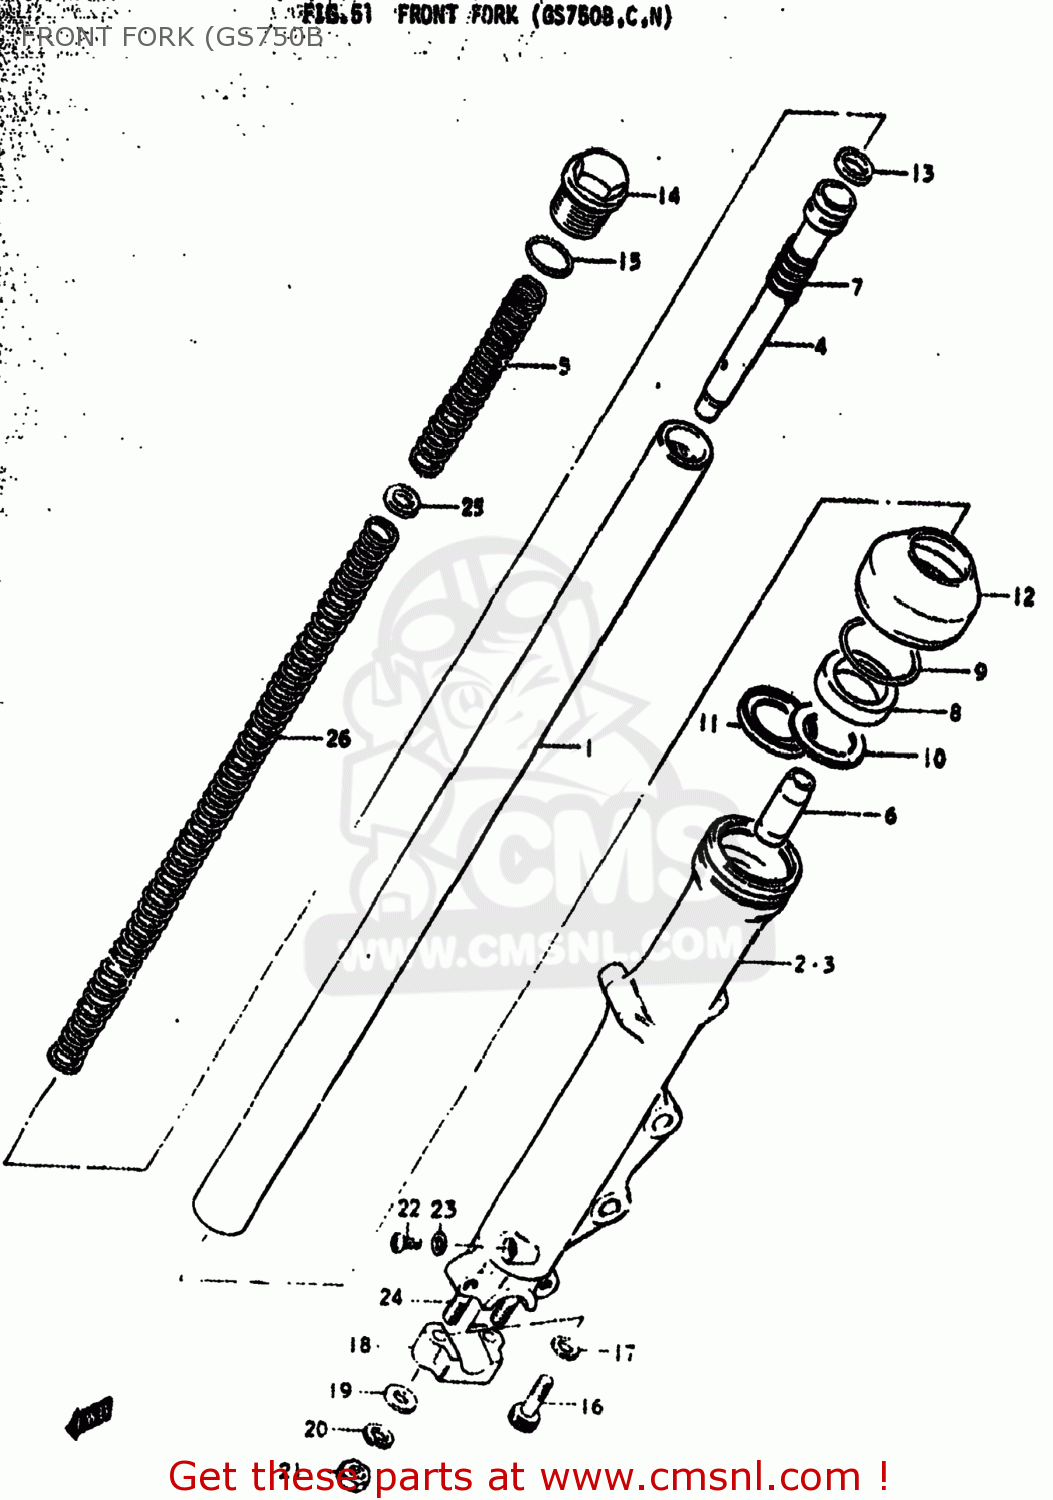 Details about   Classic Shocks For 1978 Suzuki GS750E Street Motorcycle Emgo 17-05532